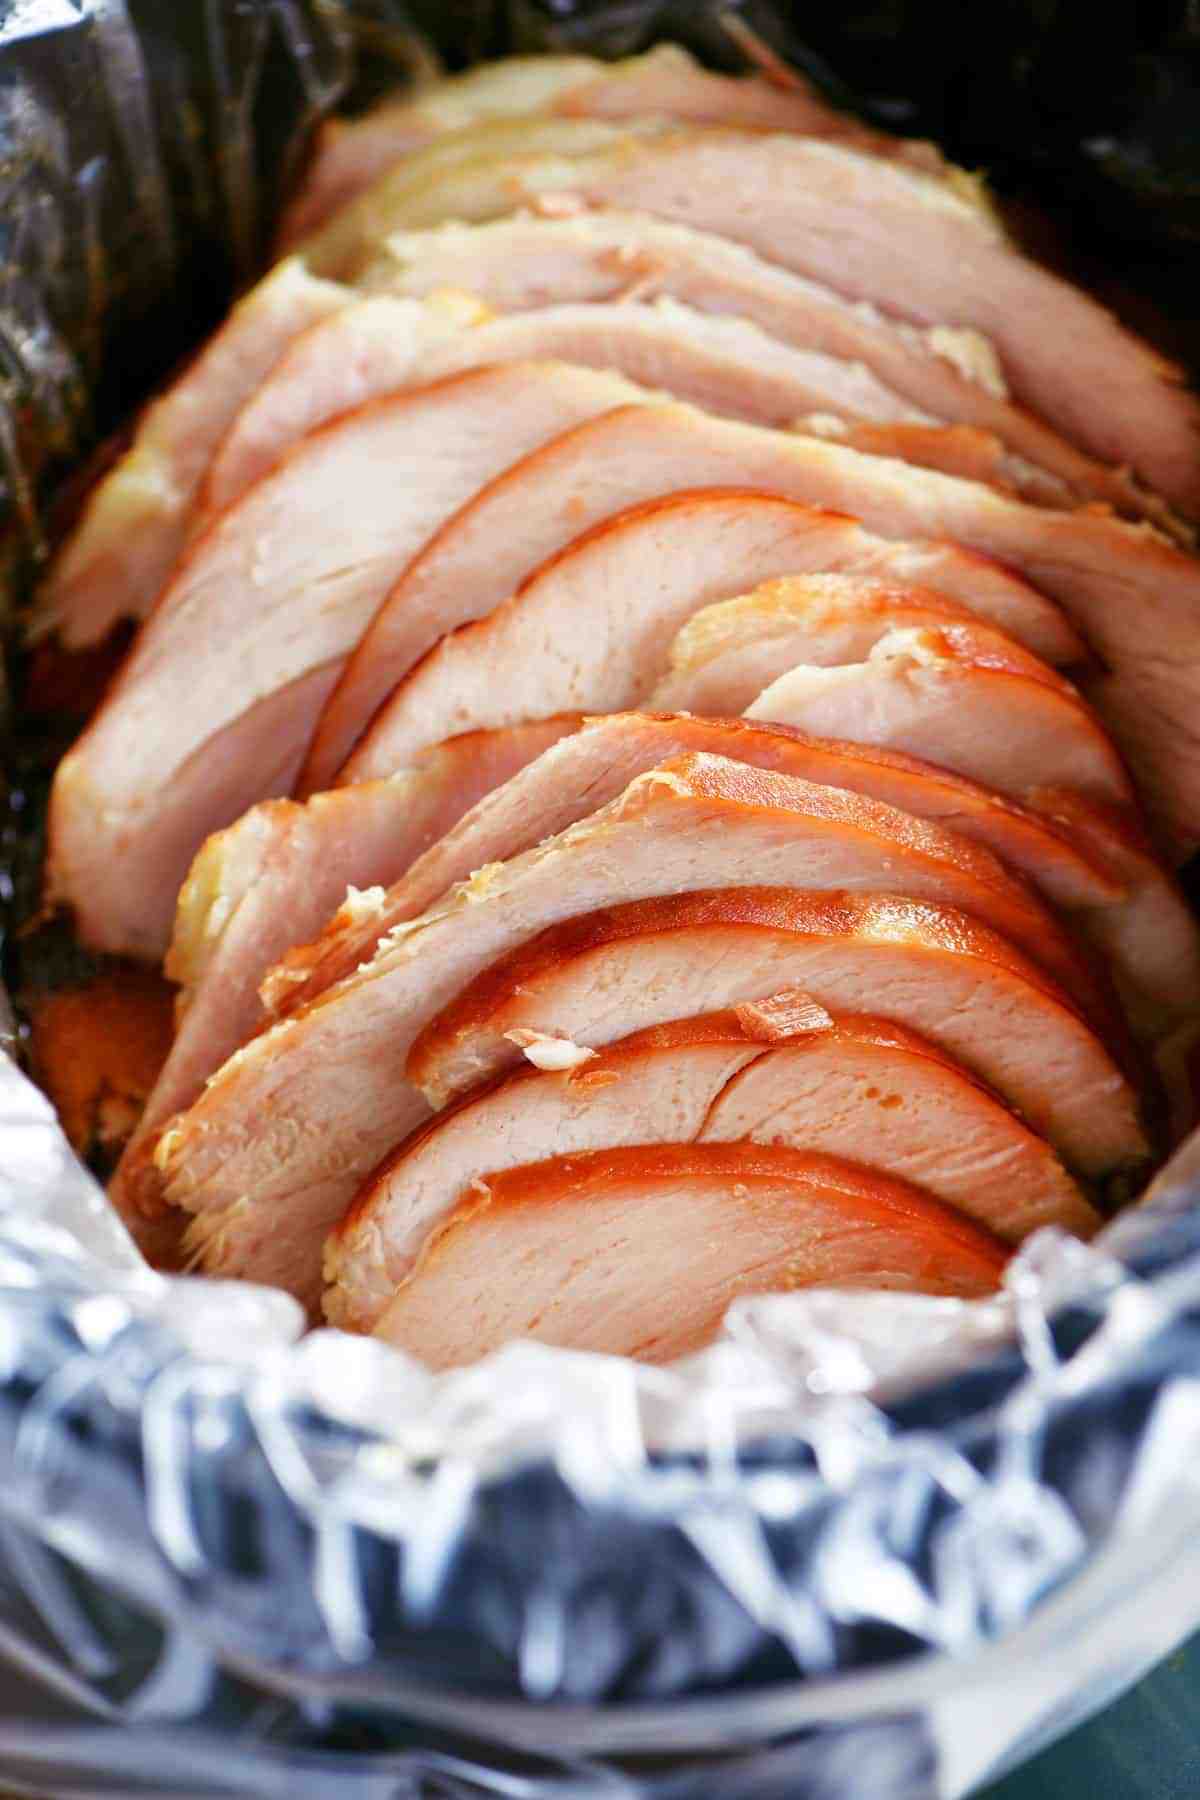 How long will sliced ham keep in the refrigerator?